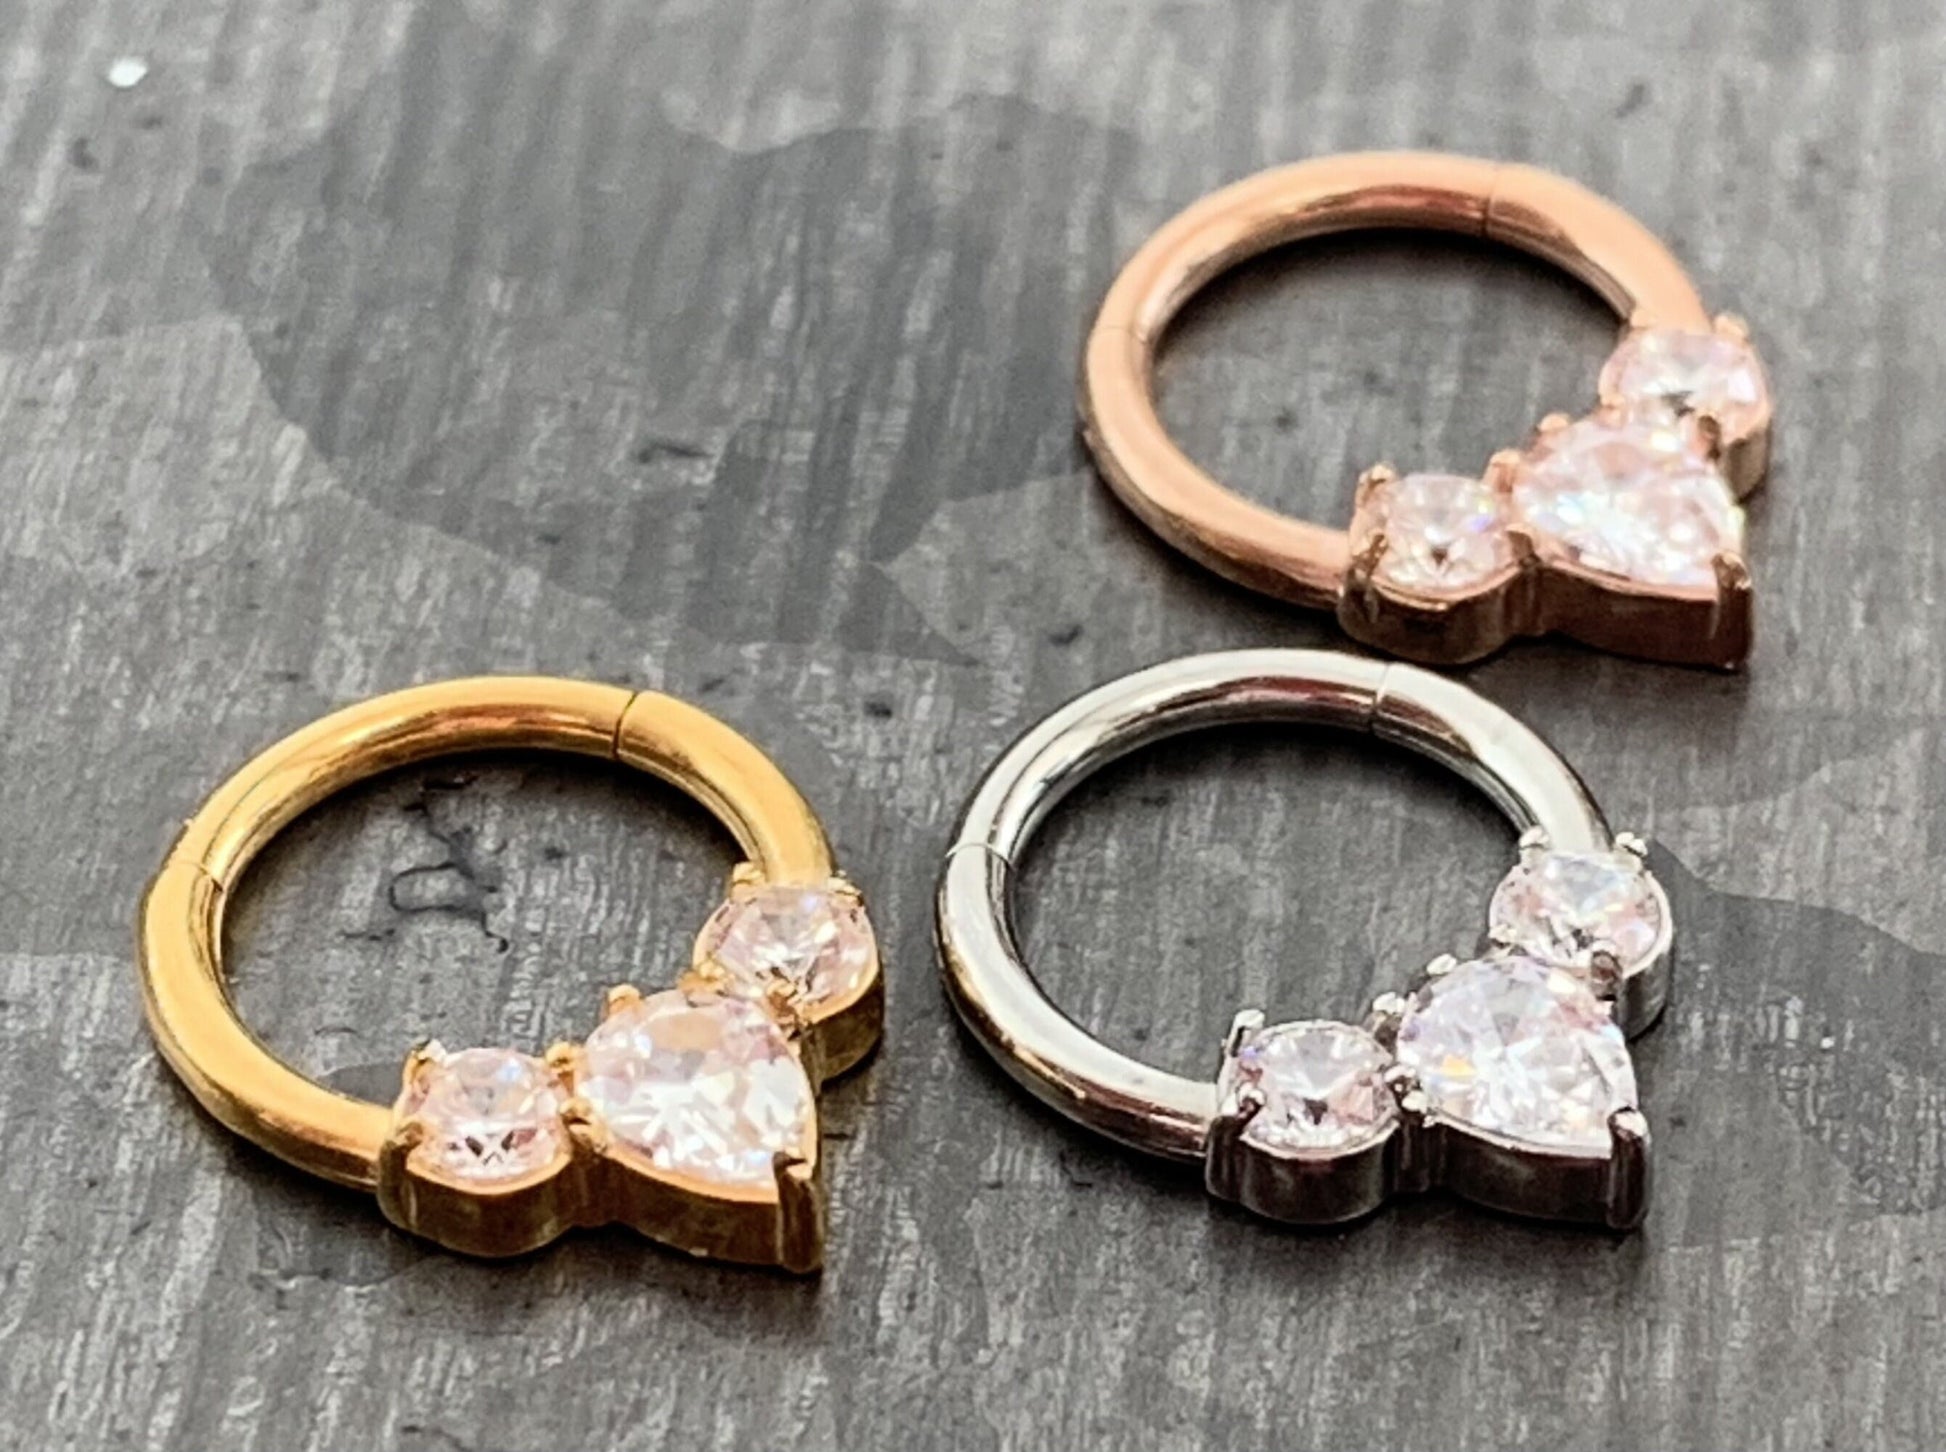 1 Piece Stunning Pear CZ Gem Surgical Steel Hinged Segment Ring - 16g - 8mm Internal Diameter - Gold, Rose Gold and Silver!!